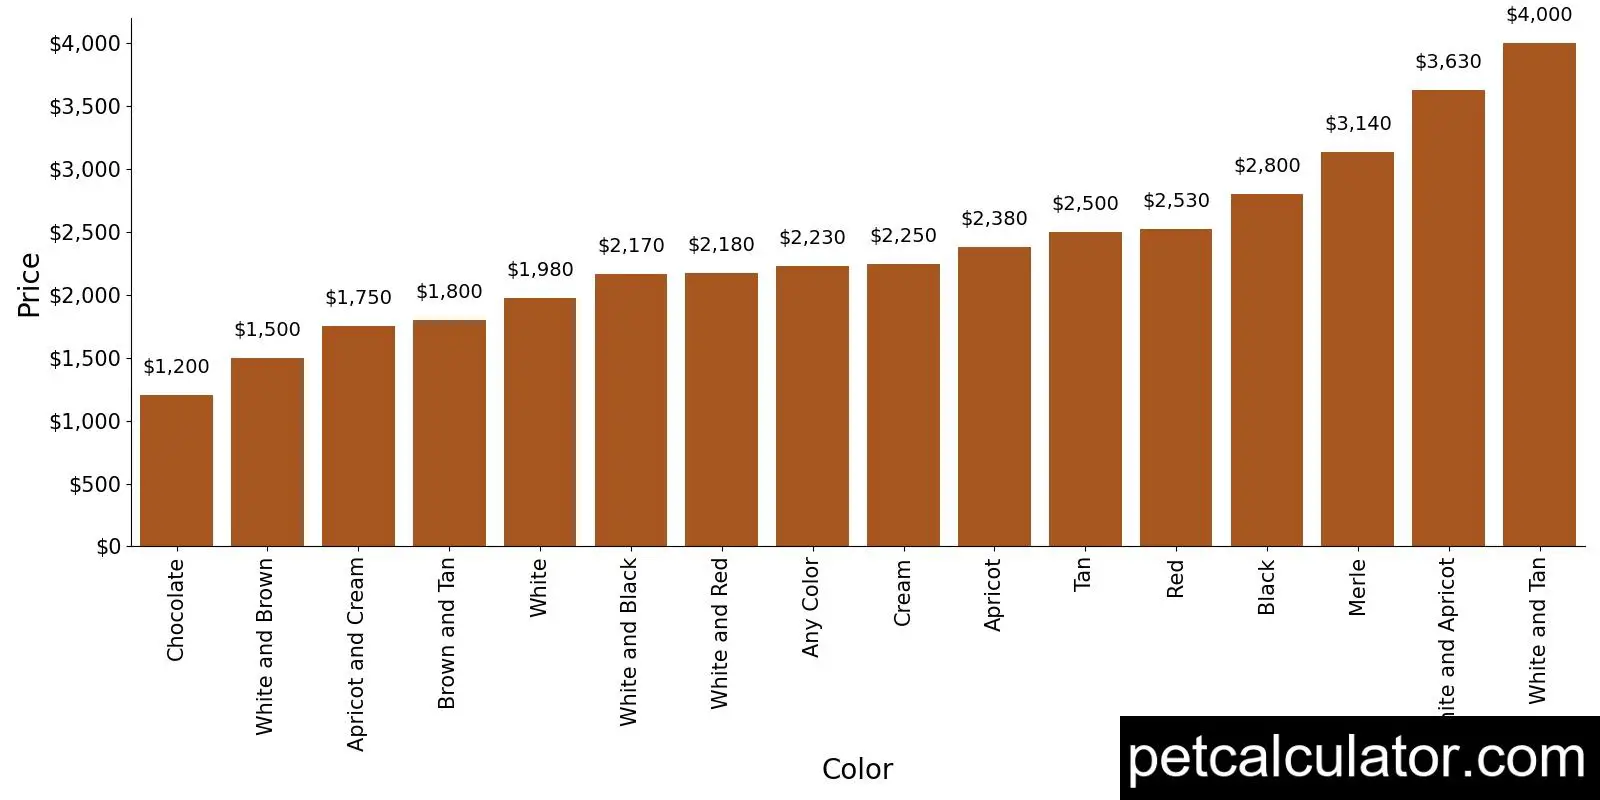 Price of Bich Poo by Color 